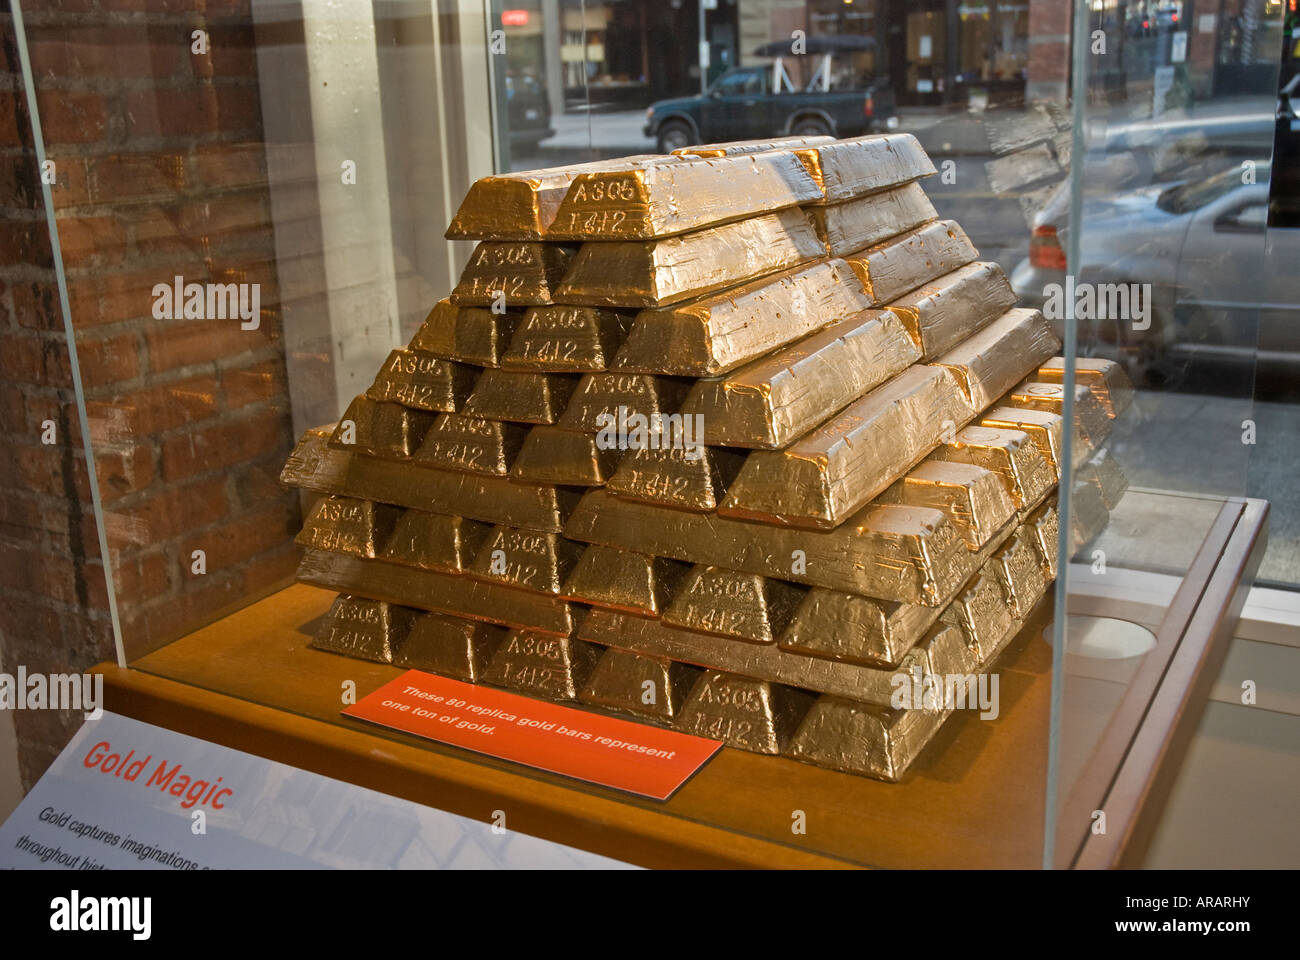 80 replica gold bars representing one ton of gold on display at Klondike  Gold Rush National Historical Park Seattle Washington Stock Photo - Alamy